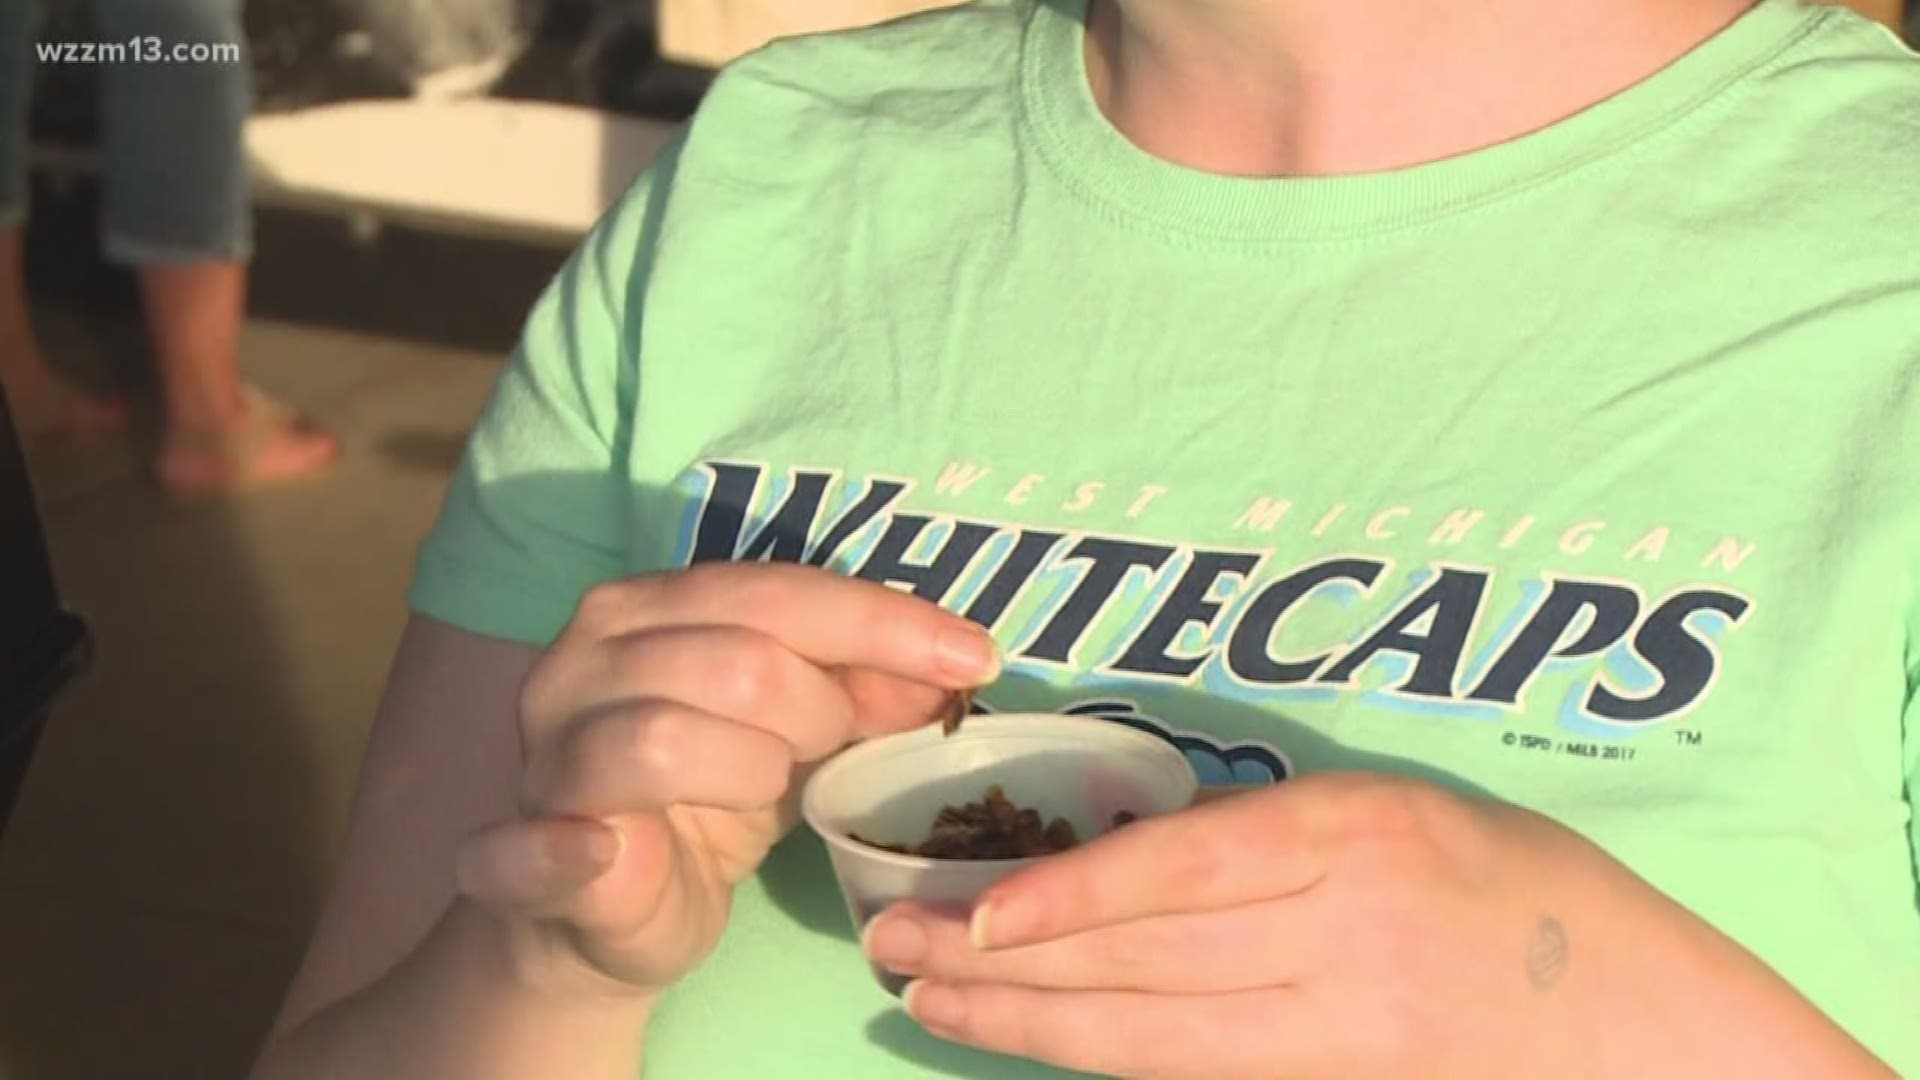 Whitecaps to offer crickets at ball games